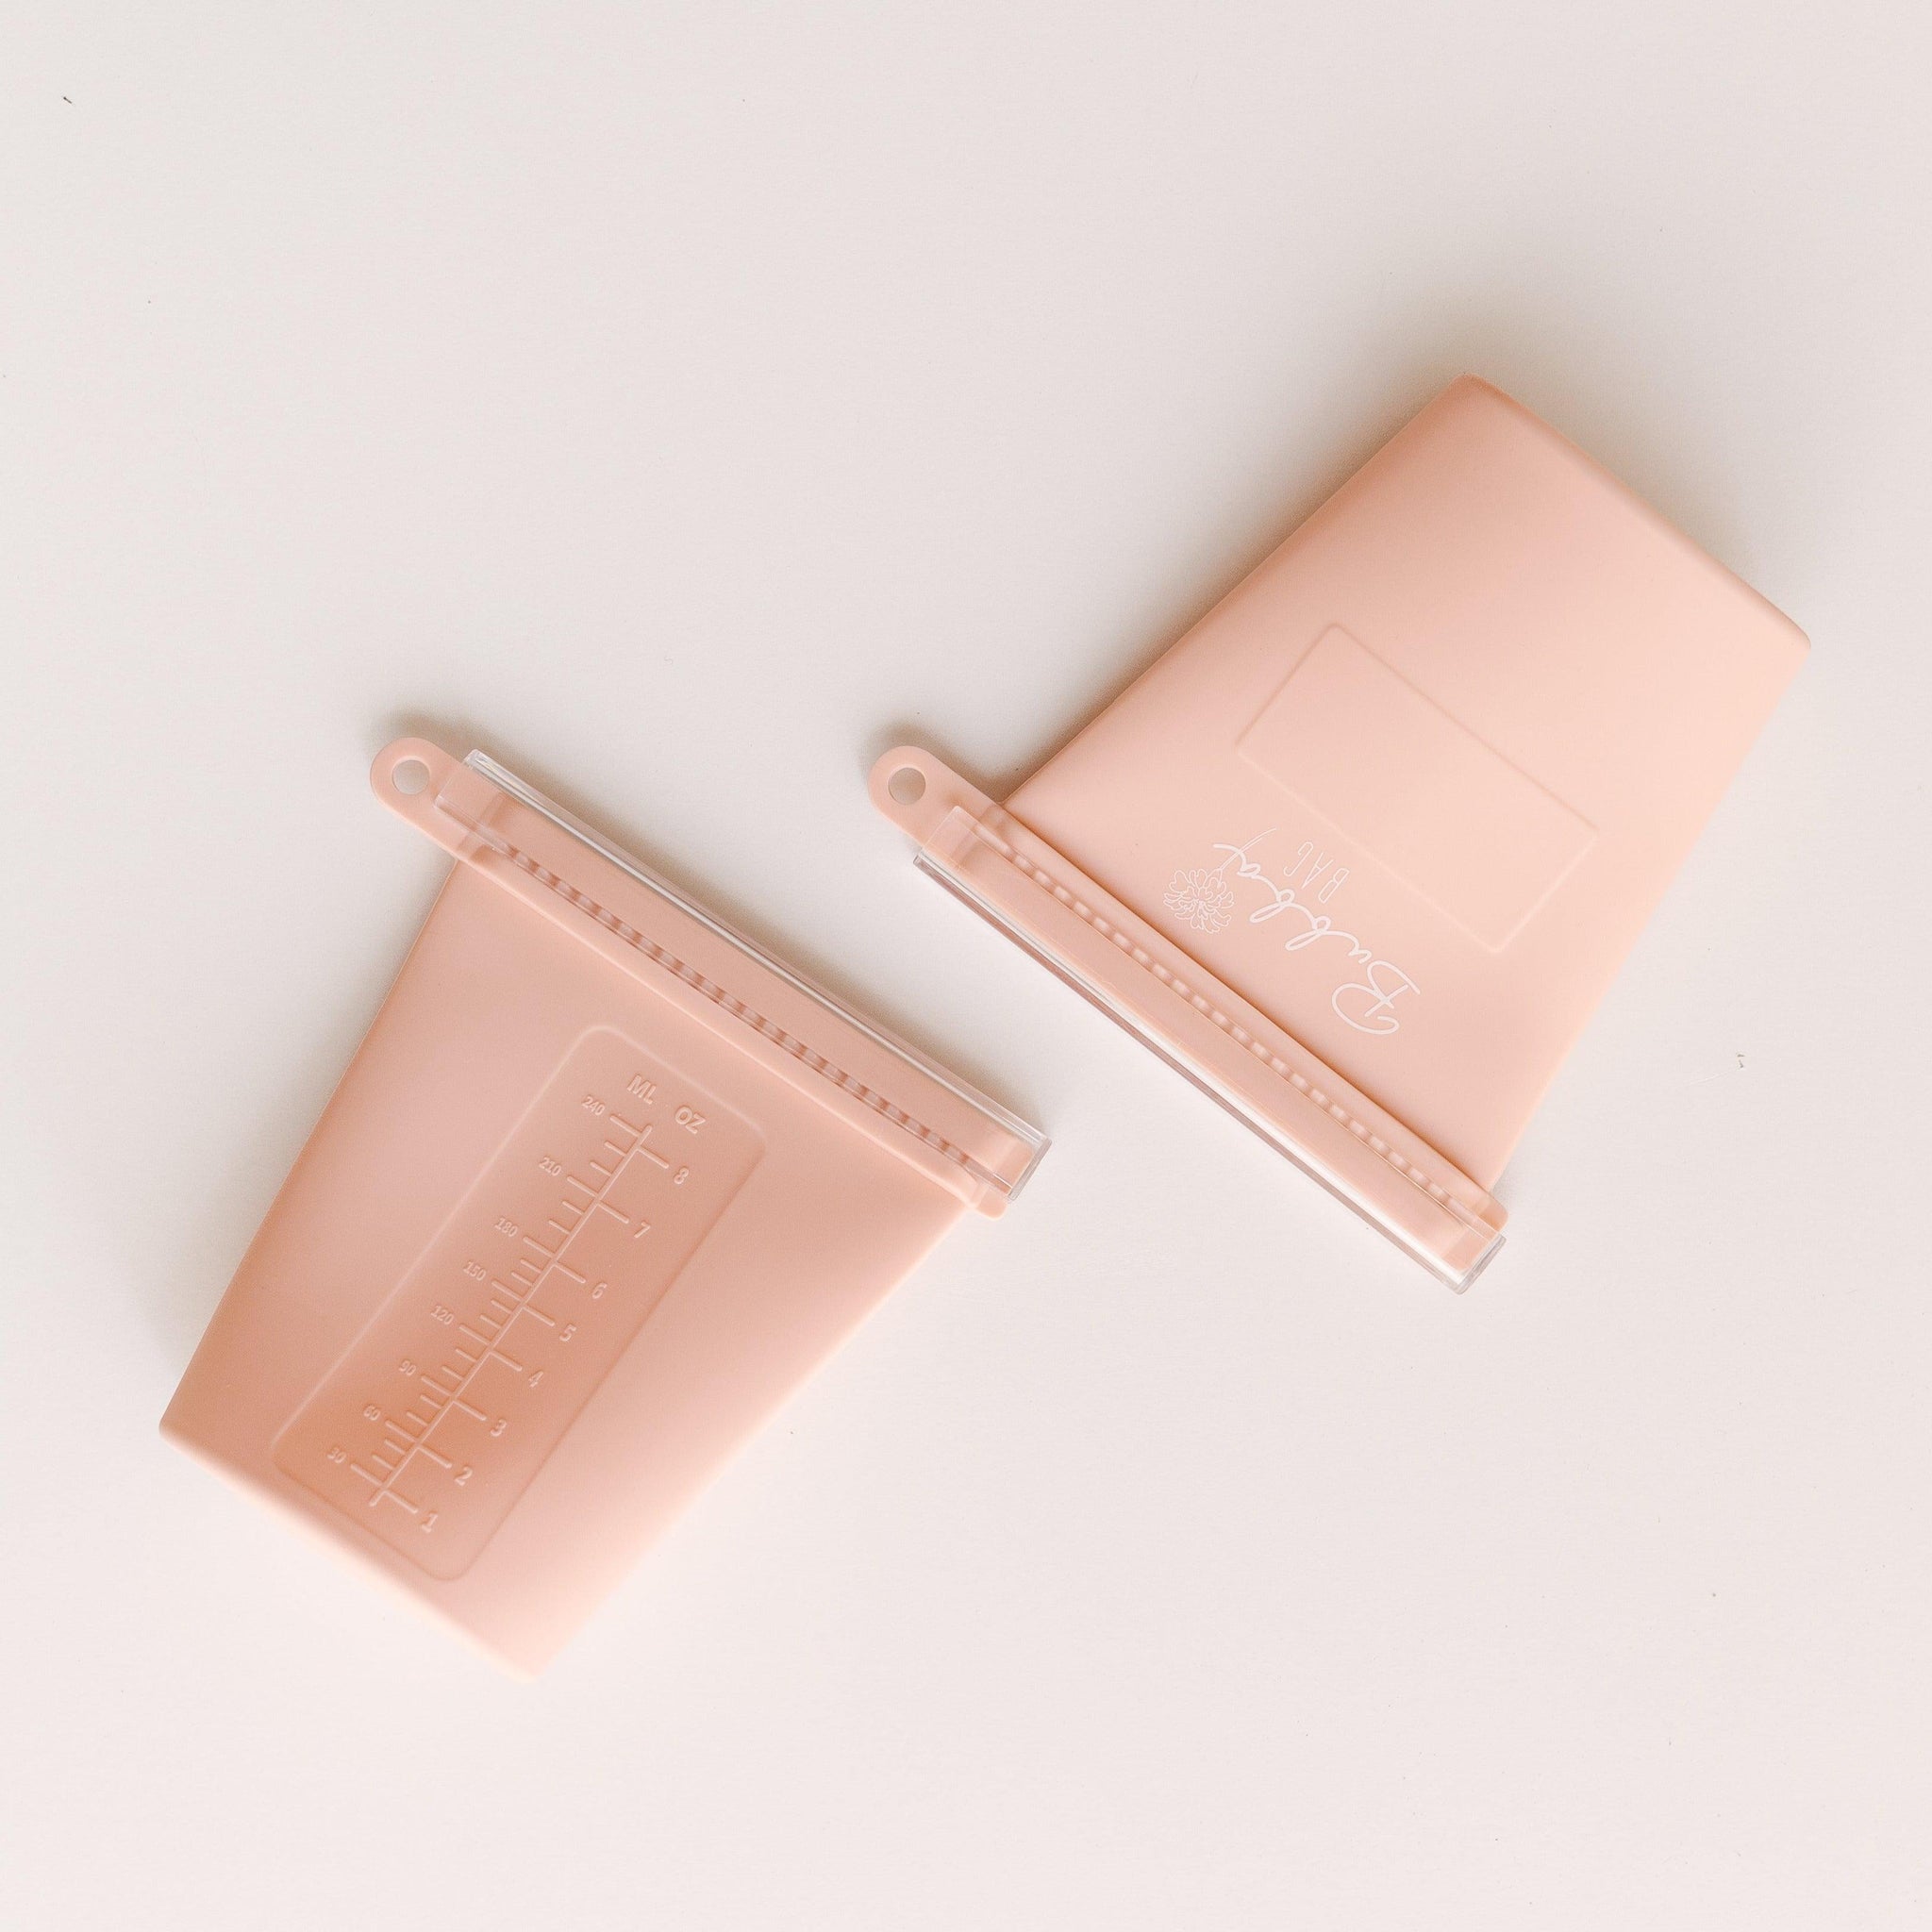 Two Marigold Baby pink plastic containers on a white surface.